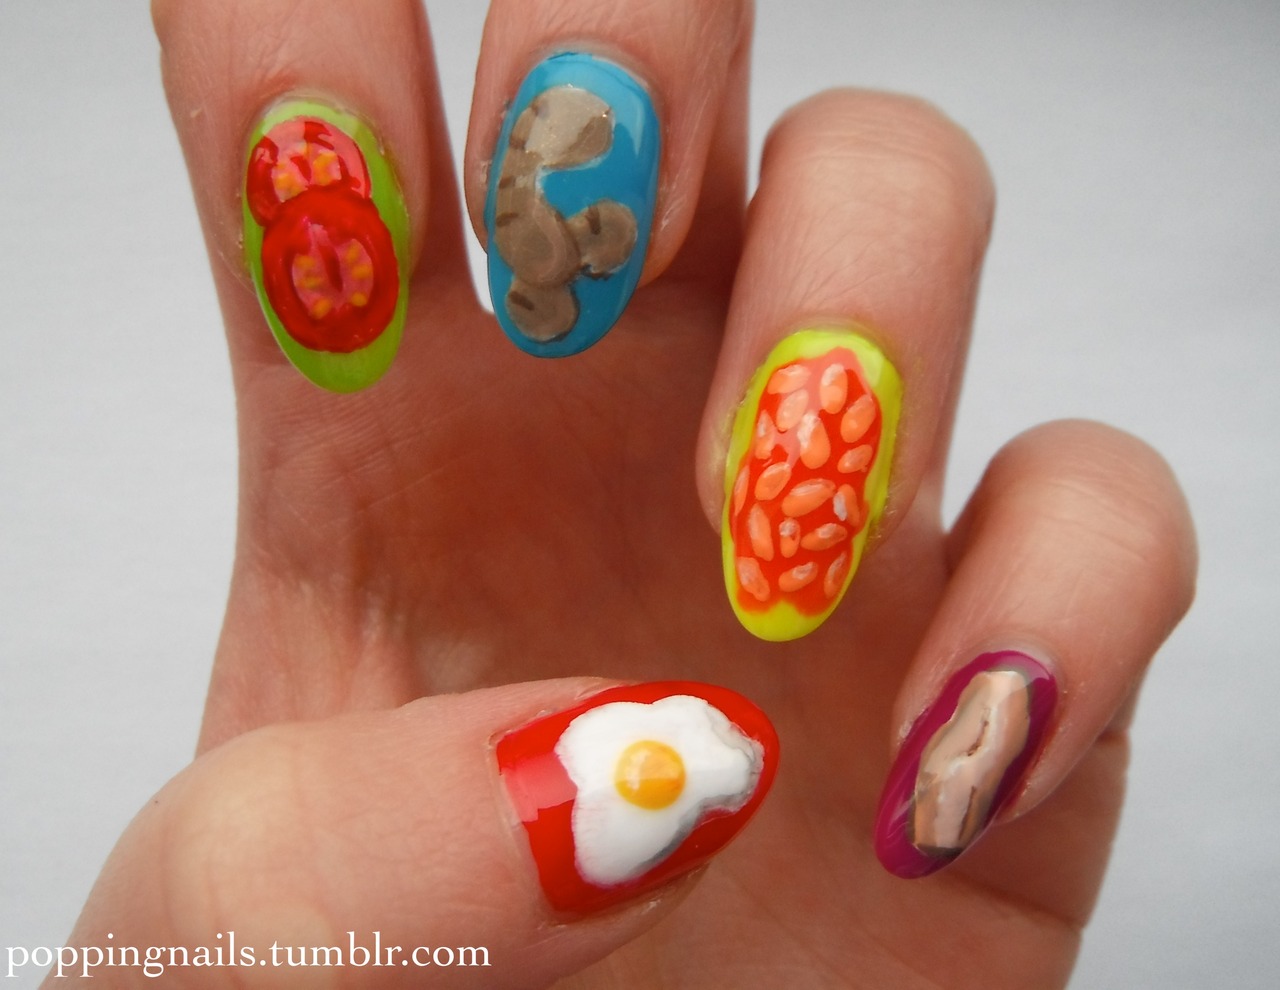 1. "Cute and Funny Nail Art Ideas for Your Next Manicure" - wide 8